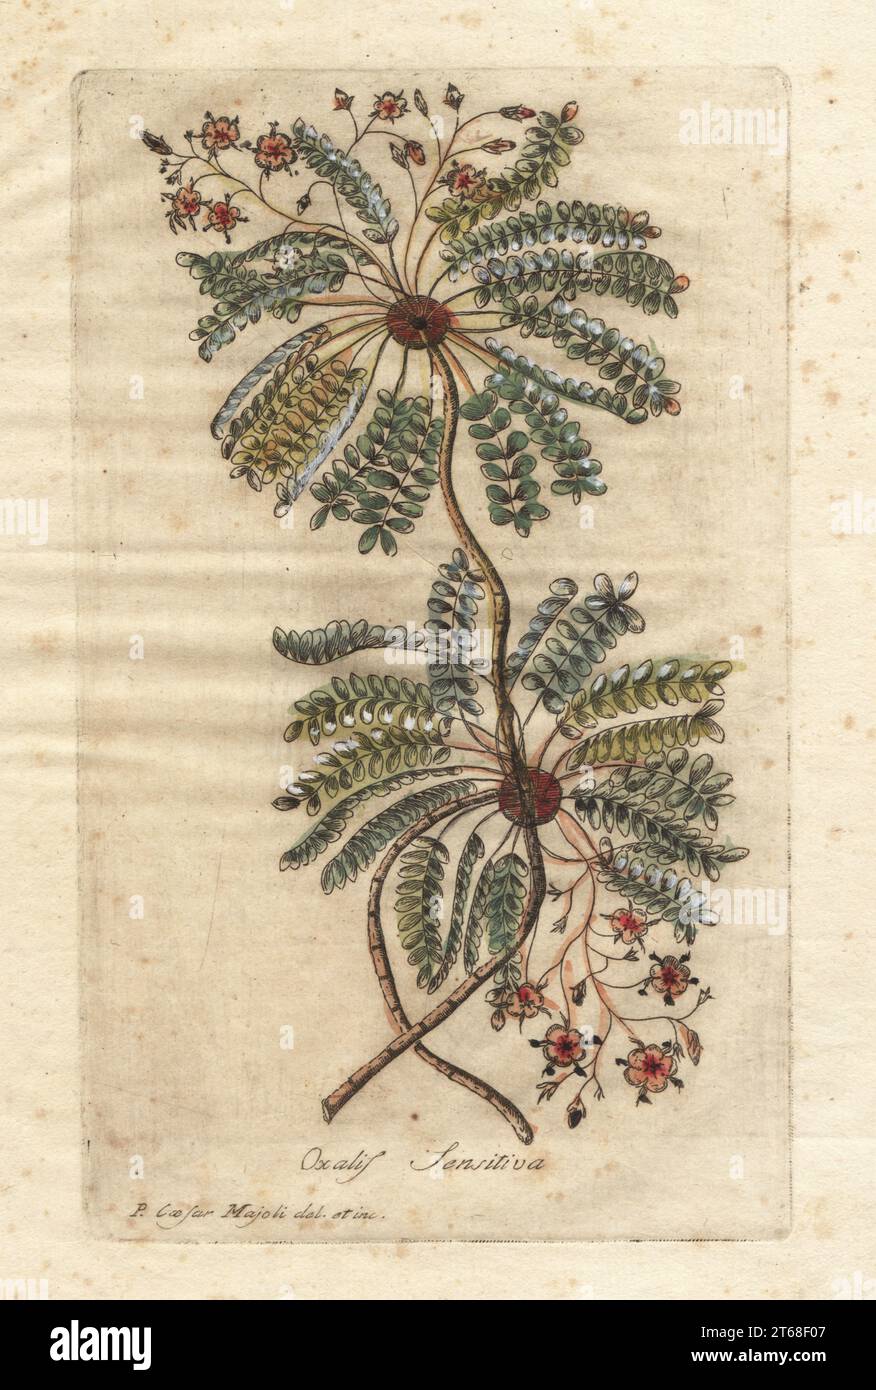 https://c8.alamy.com/comp/2T68F07/little-tree-plant-ormukkootti-biophytum-sensitivum-as-sensible-wood-sorrel-oxalis-sensitiva-nepal-and-india-handcoloured-copperplate-engraving-by-giuseppe-bianchi-after-cesare-majoli-from-giovanni-hills-decade-di-alberi-curiosi-ed-eleganti-piante-decade-of-curious-and-elegant-trees-and-plants-nella-stamperia-salomoni-rome-1786-it-had-first-been-published-by-john-hill-in-london-in-1773-2T68F07.jpg